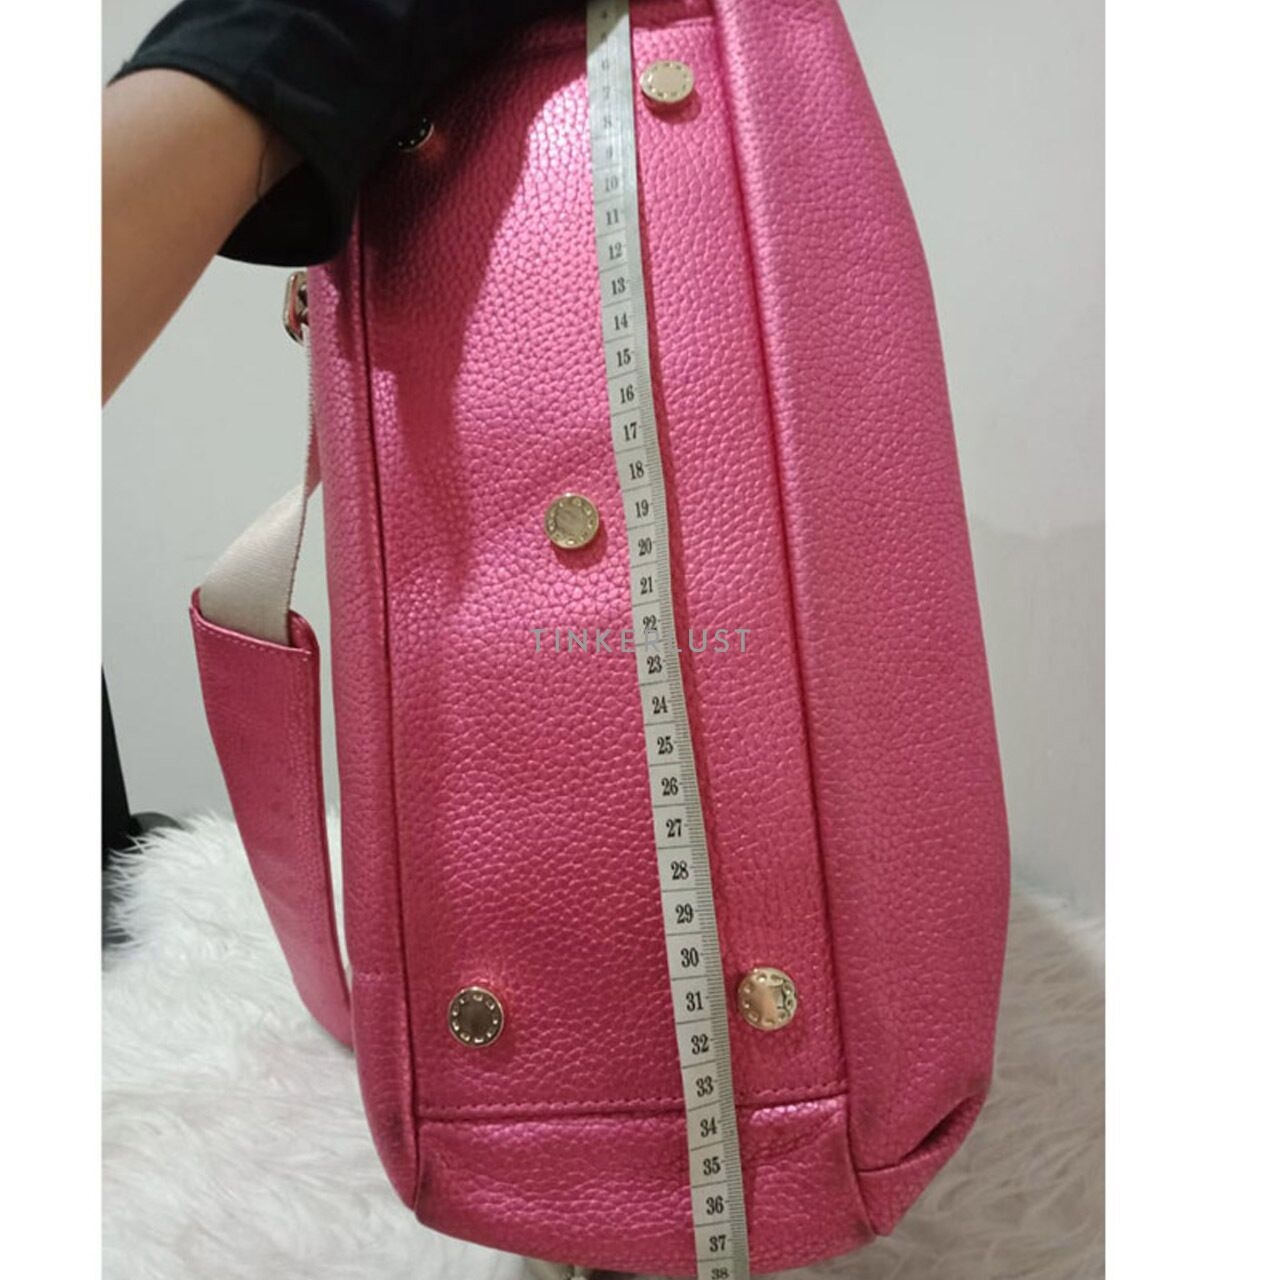 Aigner Pink Leather Backpack